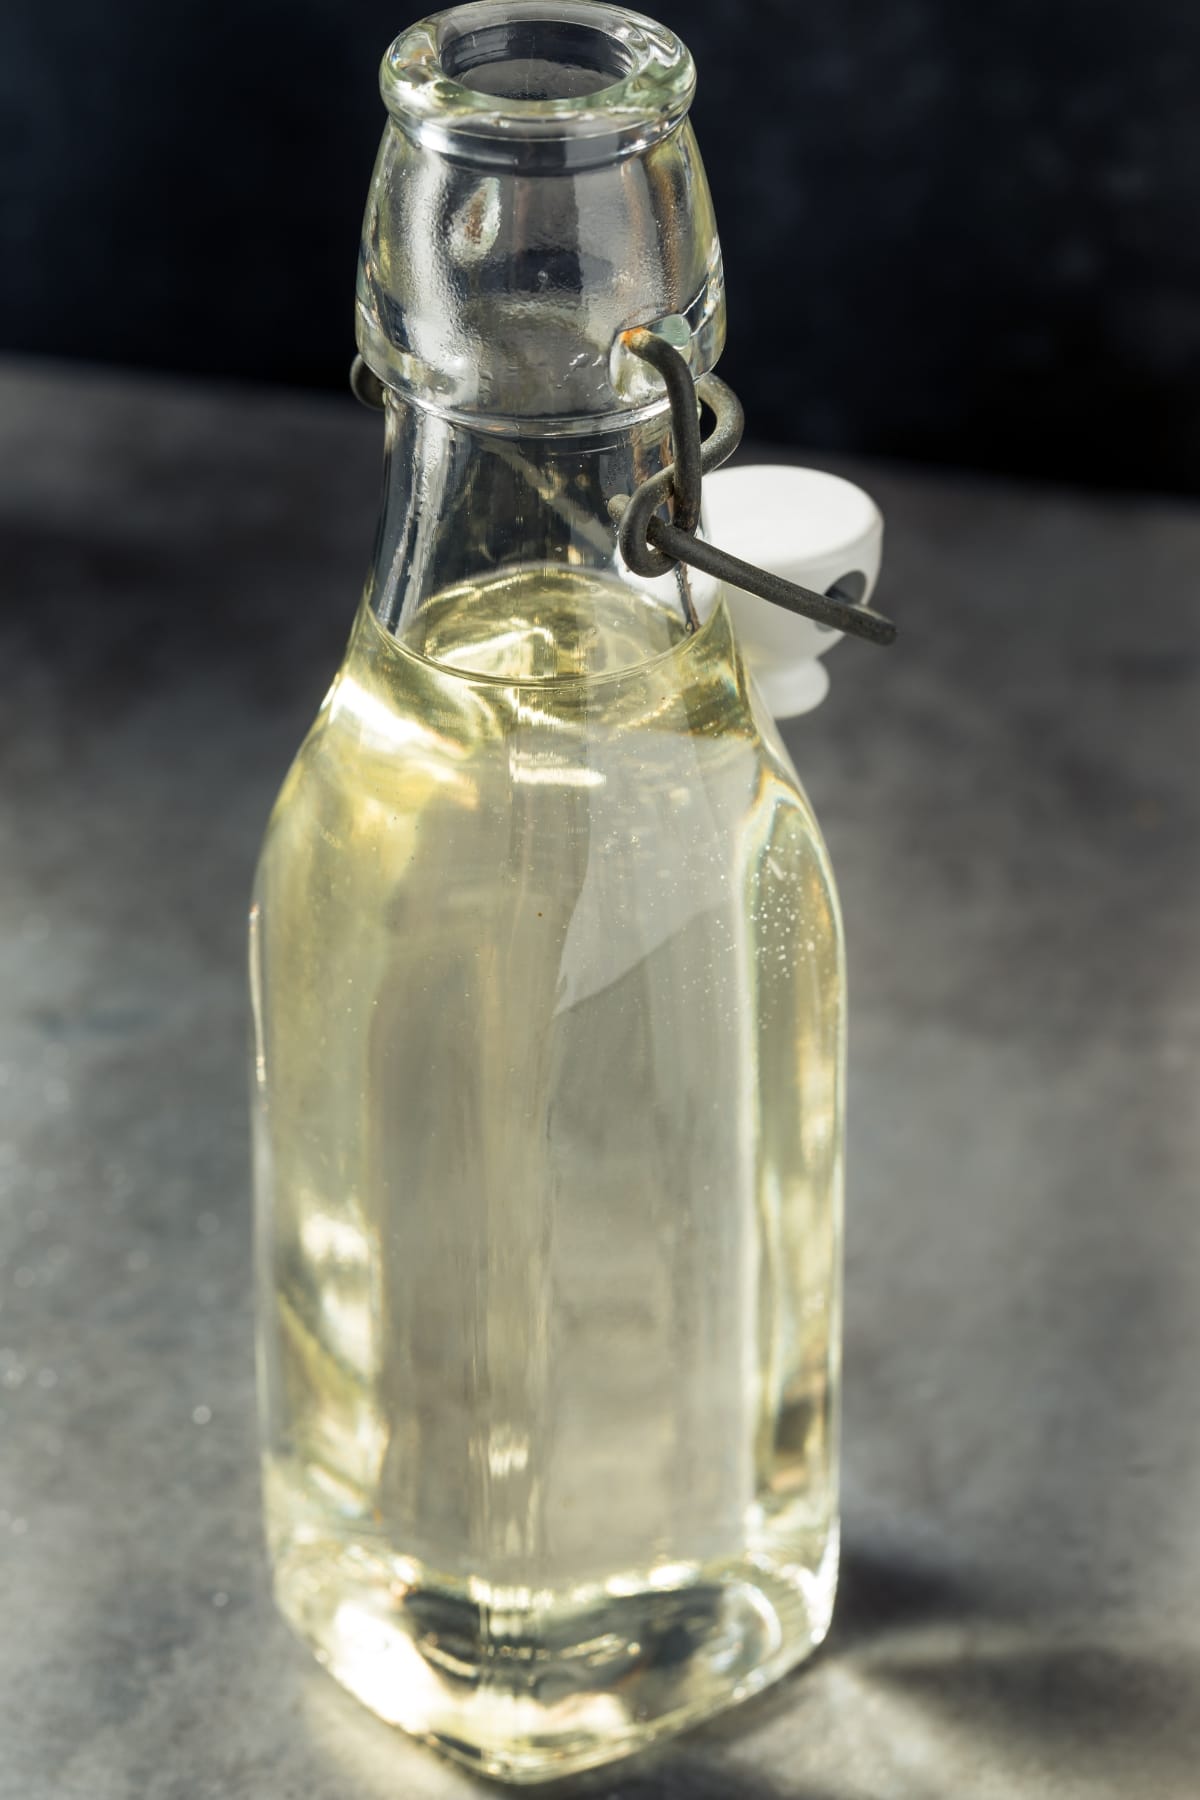 Homemade simple syrup in a glass bottle. 